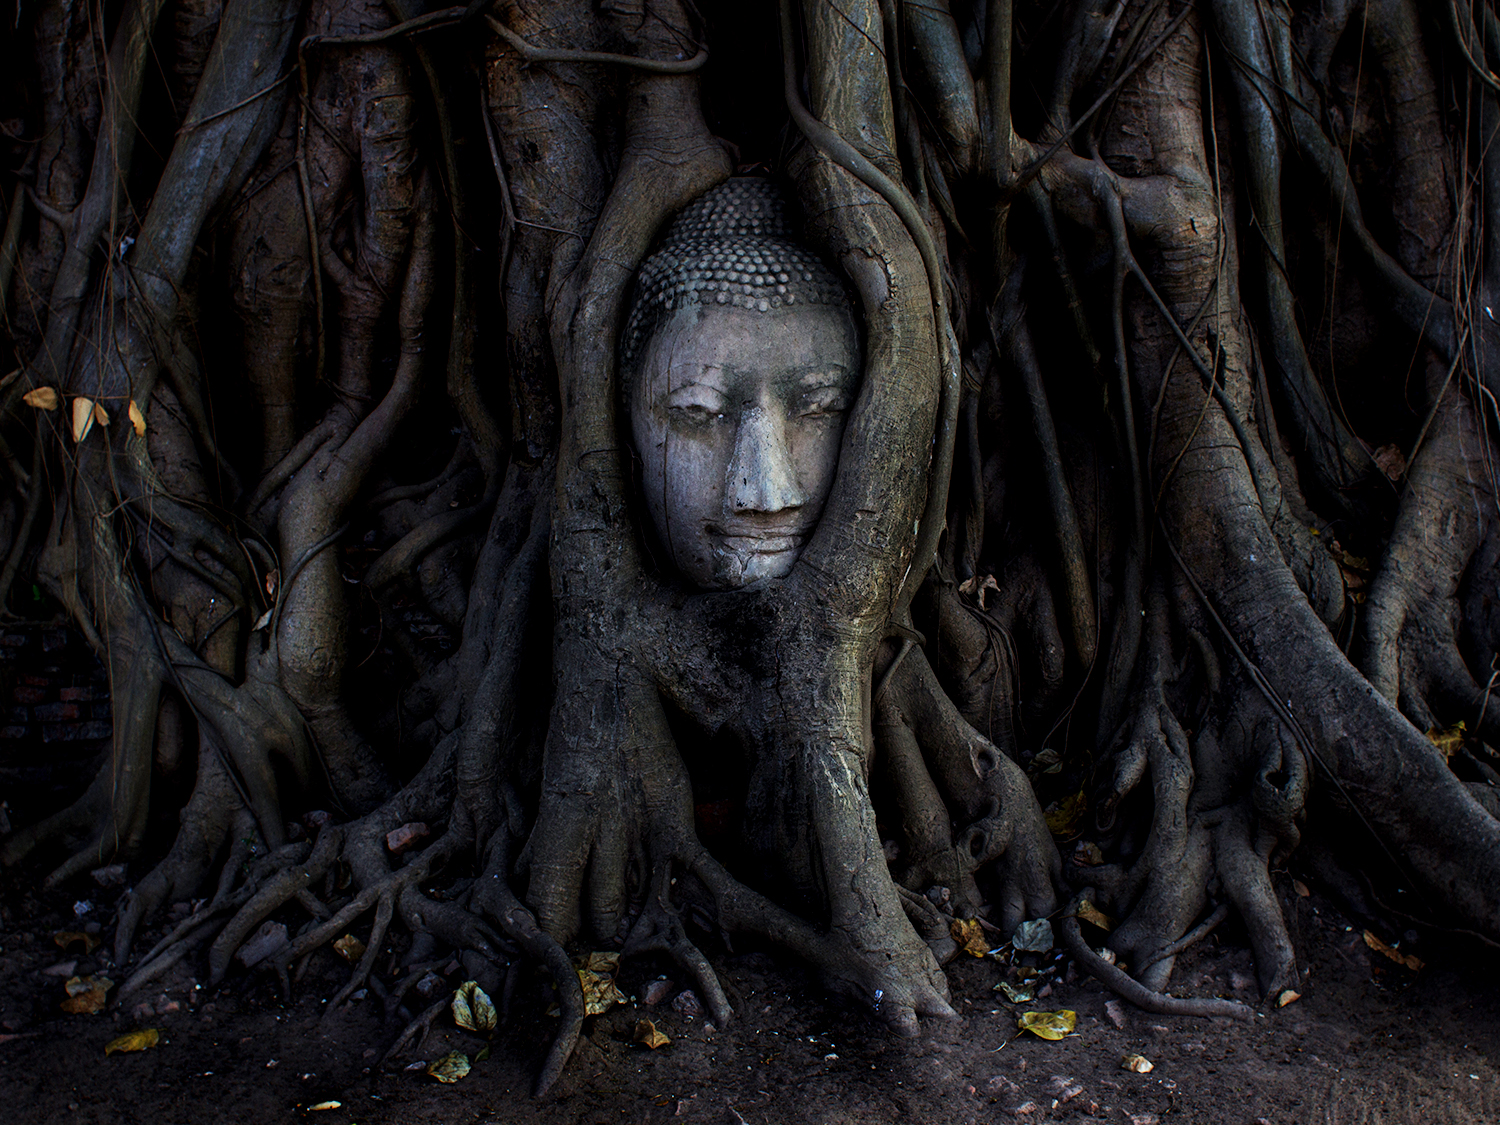 A buddha head overgrown by tree roots in Ayutthaya, Thailand.